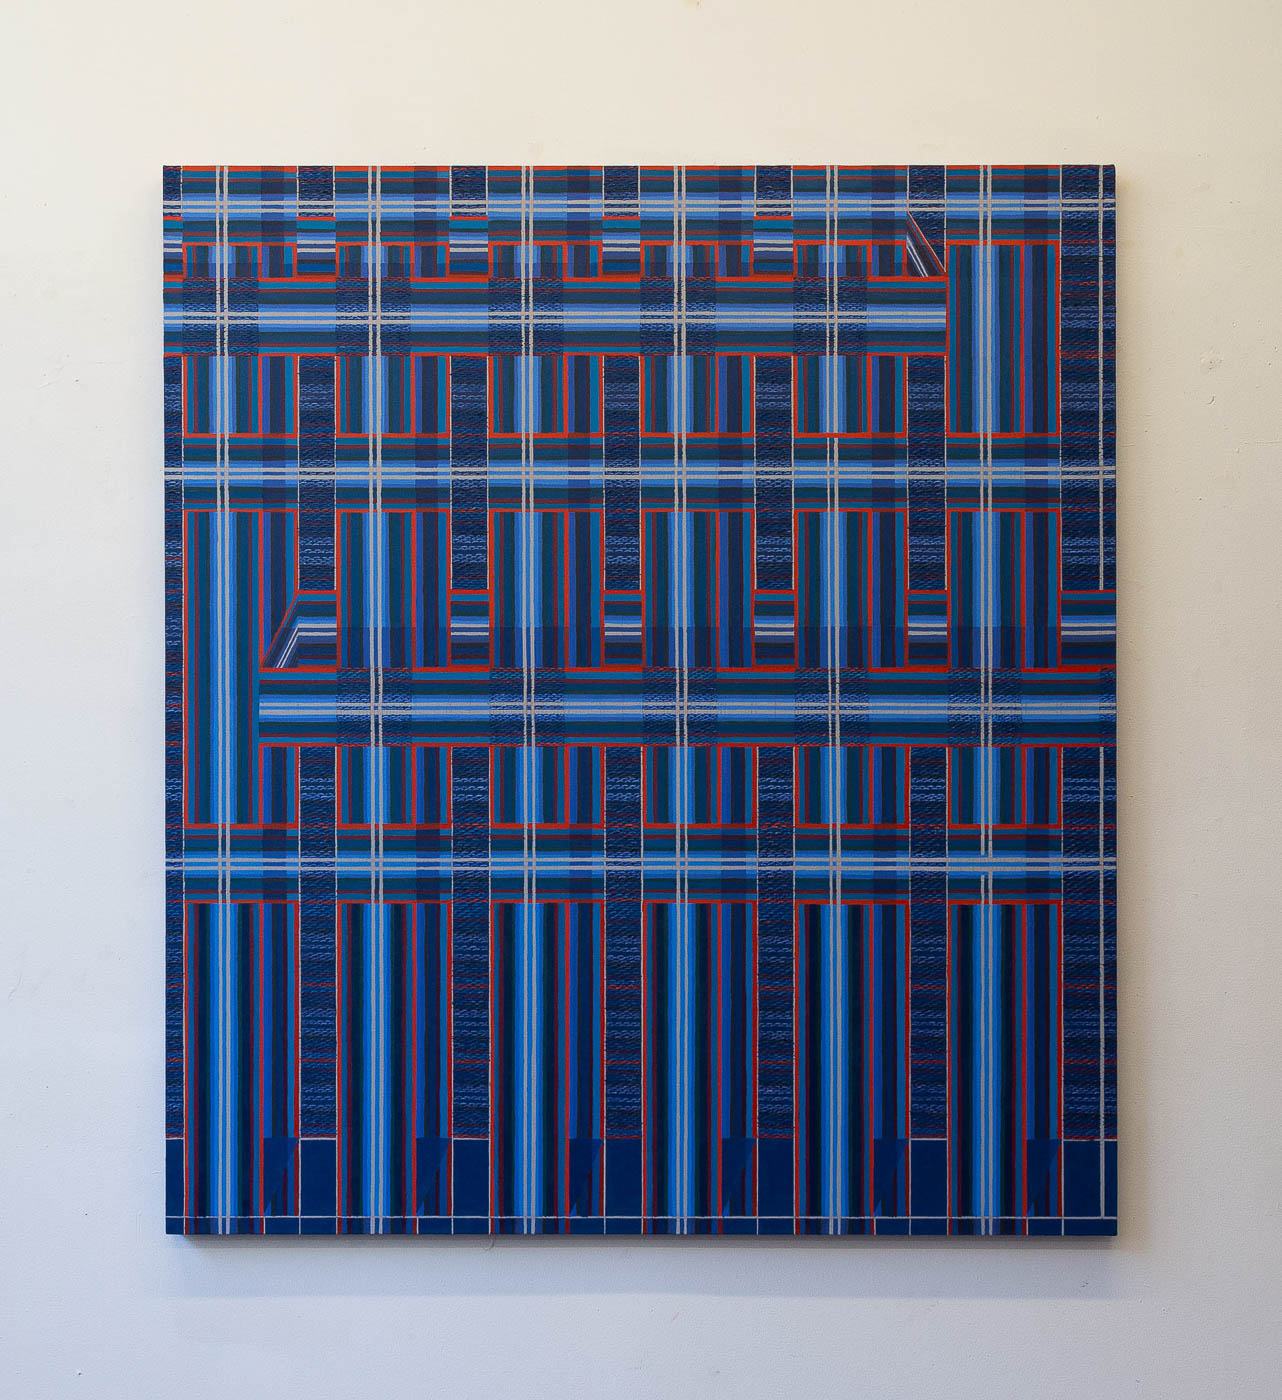 A painting replicating a woven textile